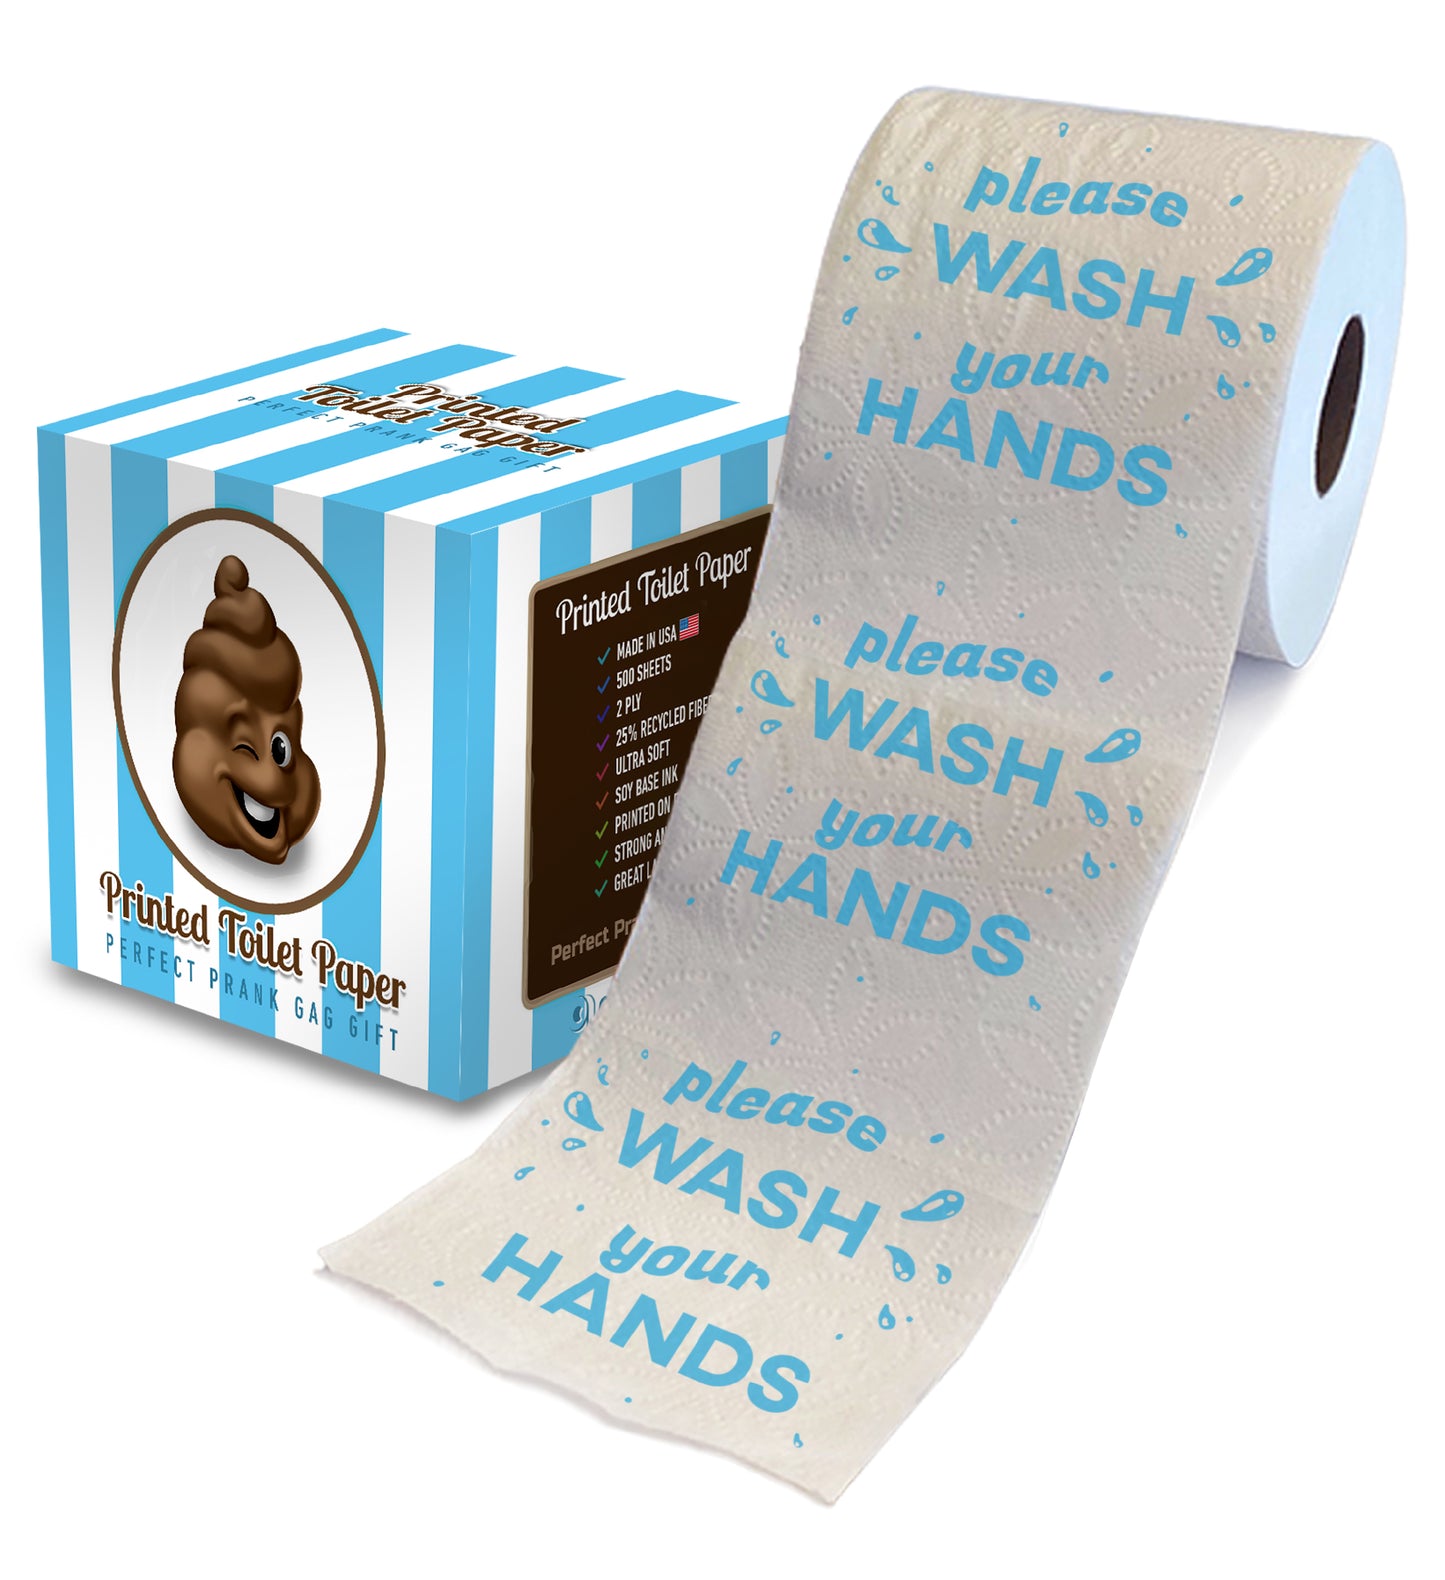 Printed TP Please Wash Your Hands Printed Toilet Paper Gag Gift – 500 Sheets